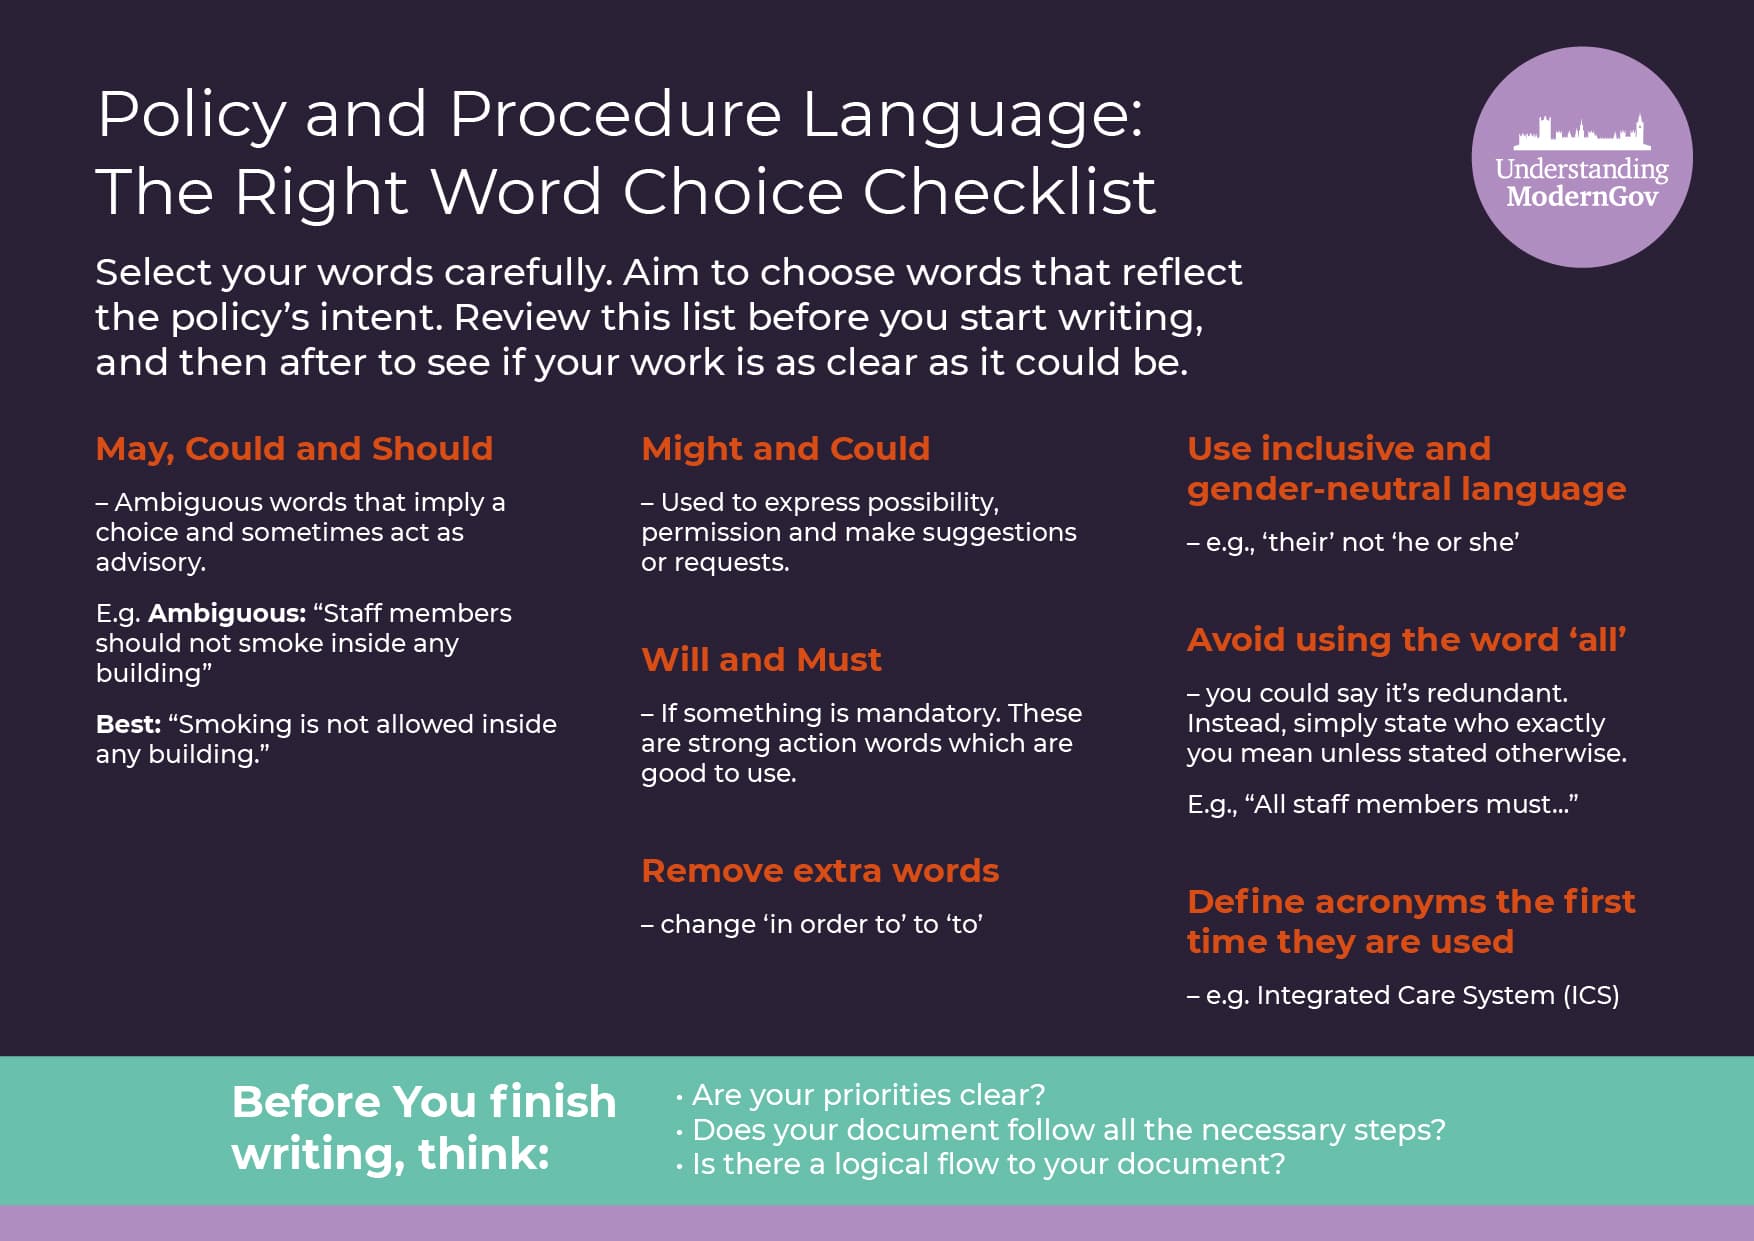 Policy and Procedure writing word checklist